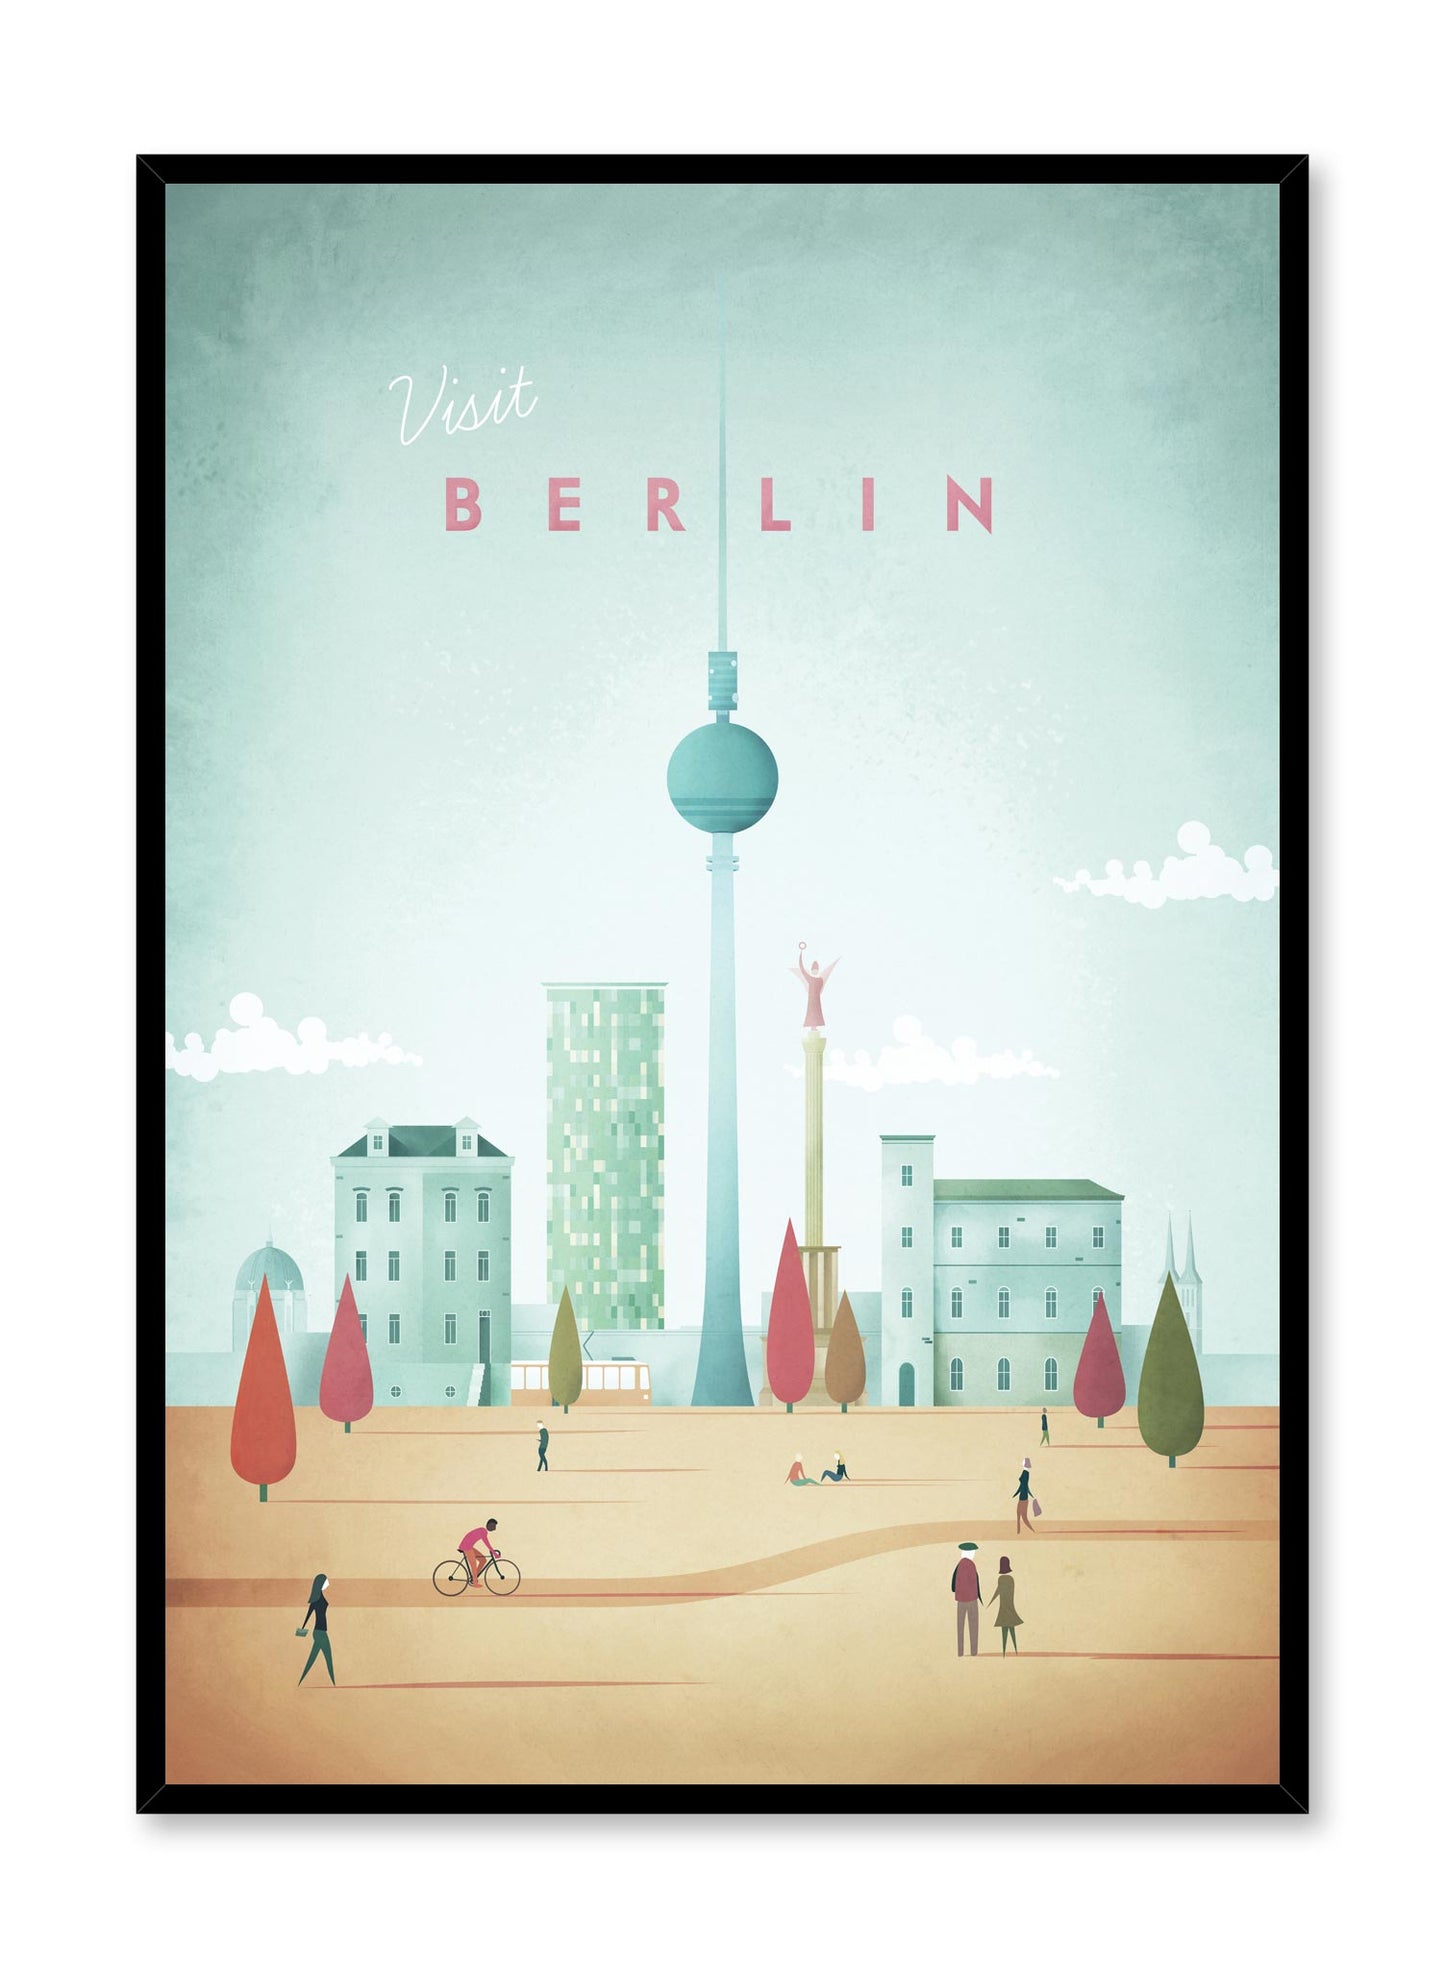 Modern minimalist travel poster by Opposite Wall with illustration of Berlin